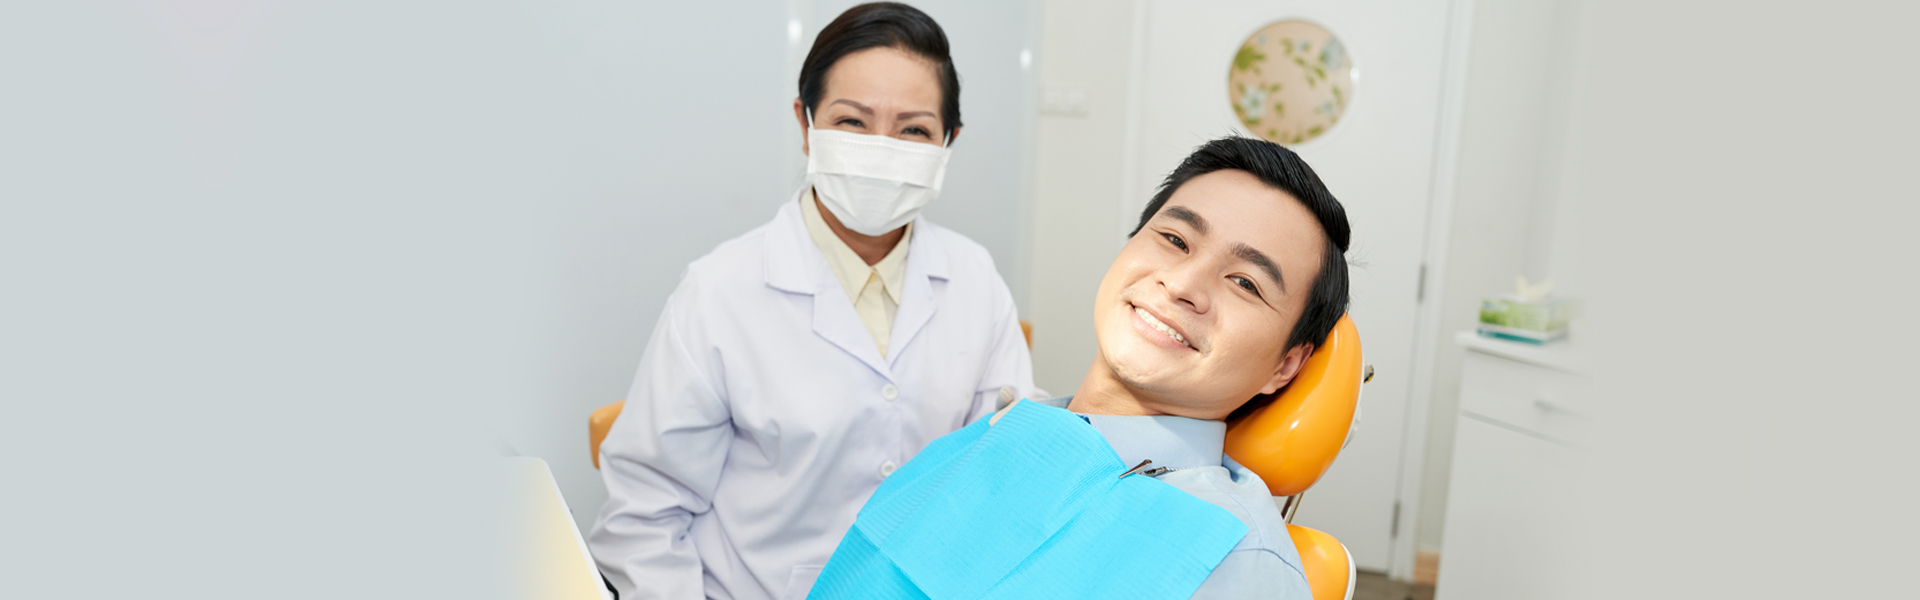 Dental Implants: Get Your Missing Tooth Replaced